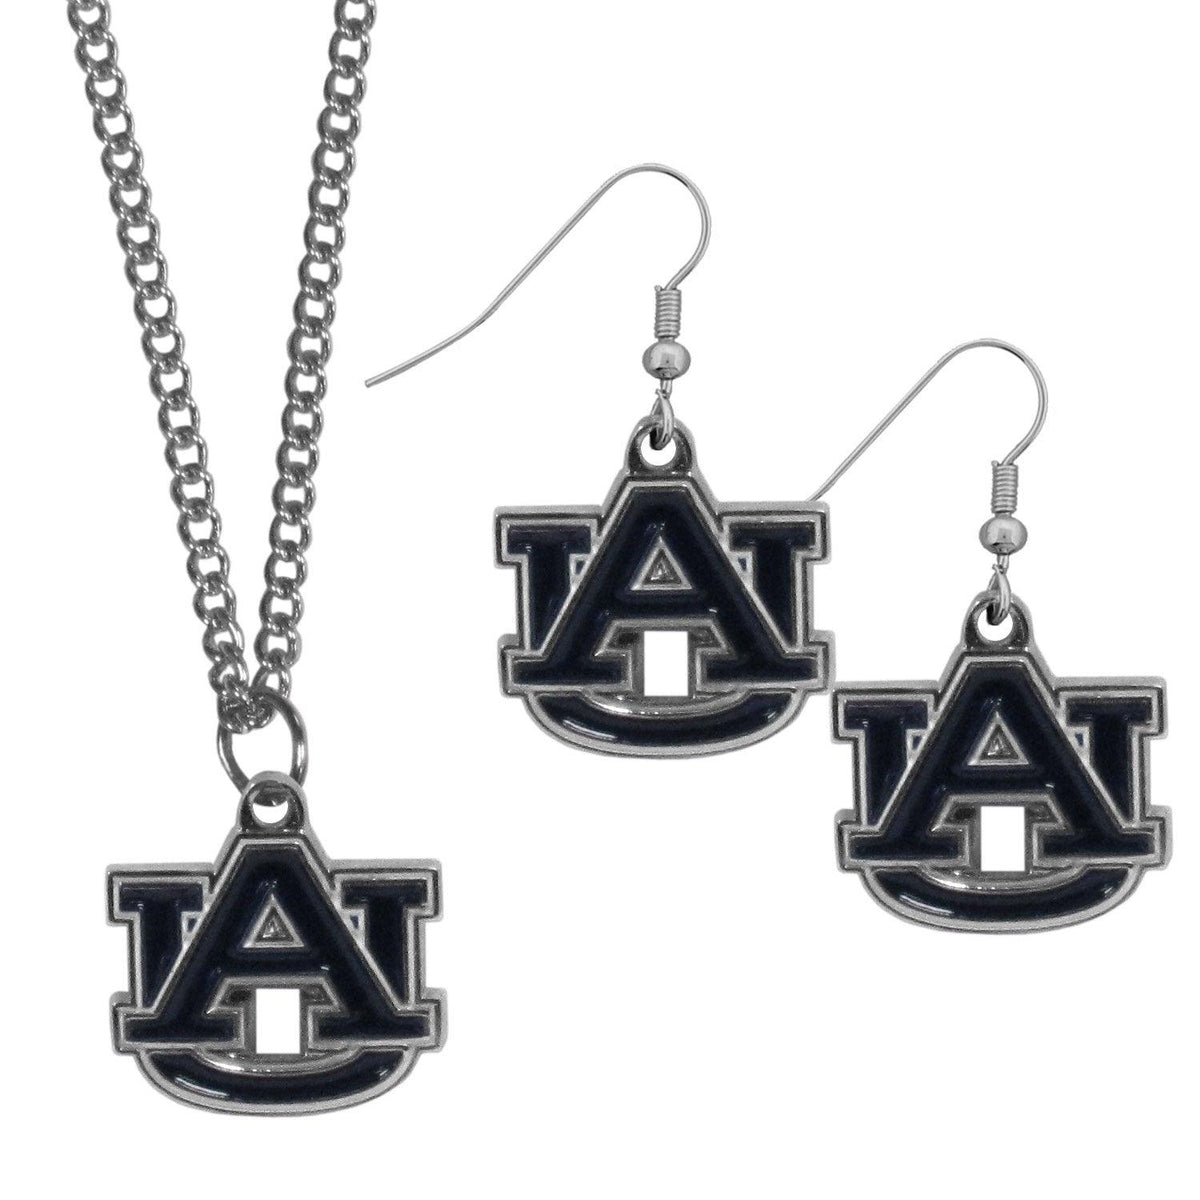 Auburn Tigers Dangle Earrings and Chain Necklace Set - Flyclothing LLC